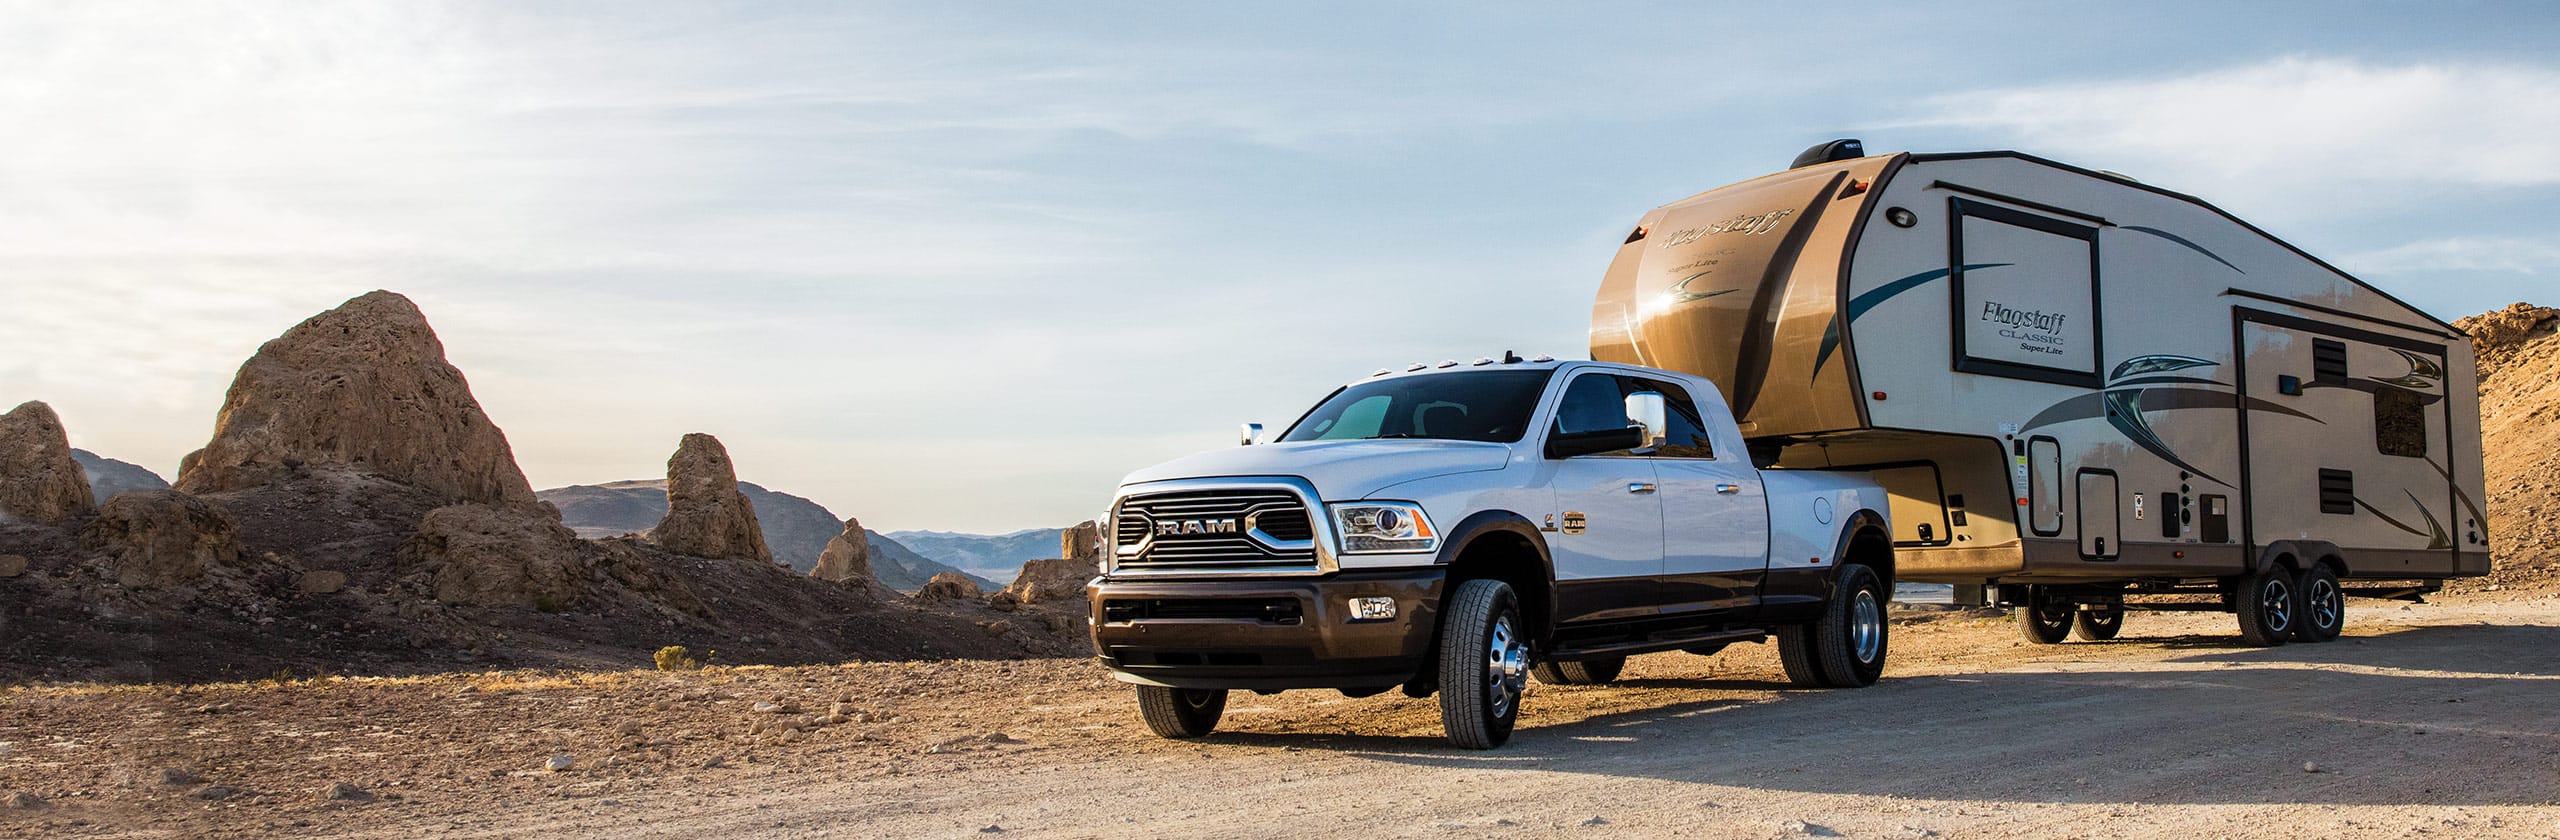 Ram Trucks - Towing & Payload Capacity Guide